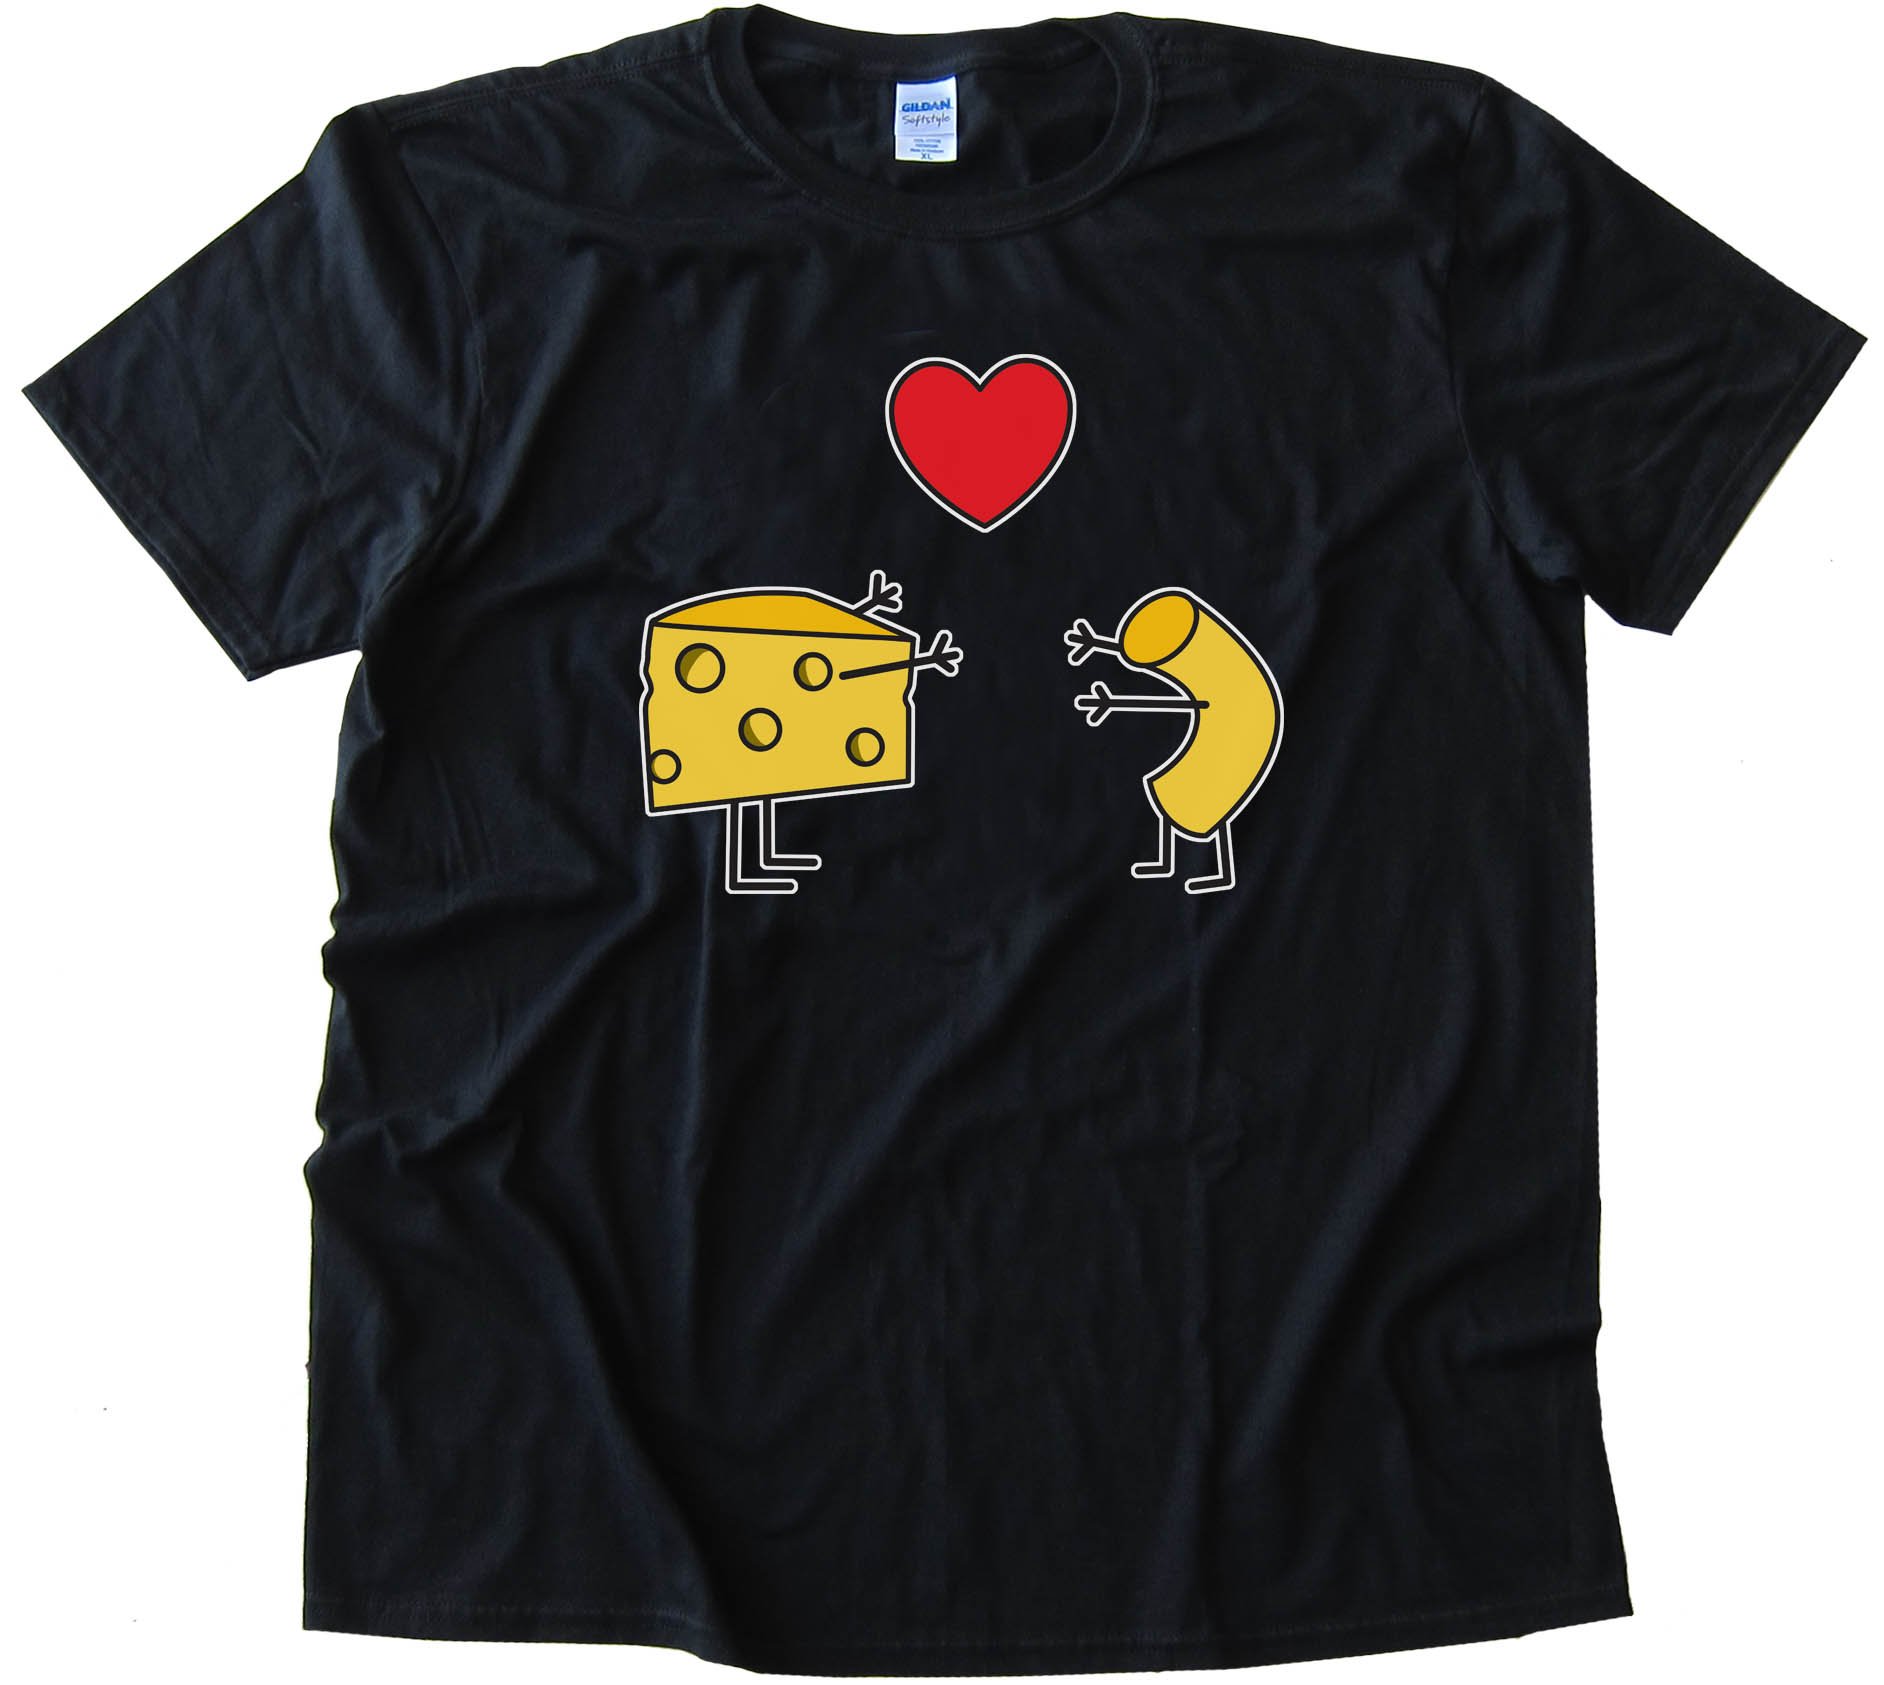 Mac & Cheese Together Forever - Tee Shirt